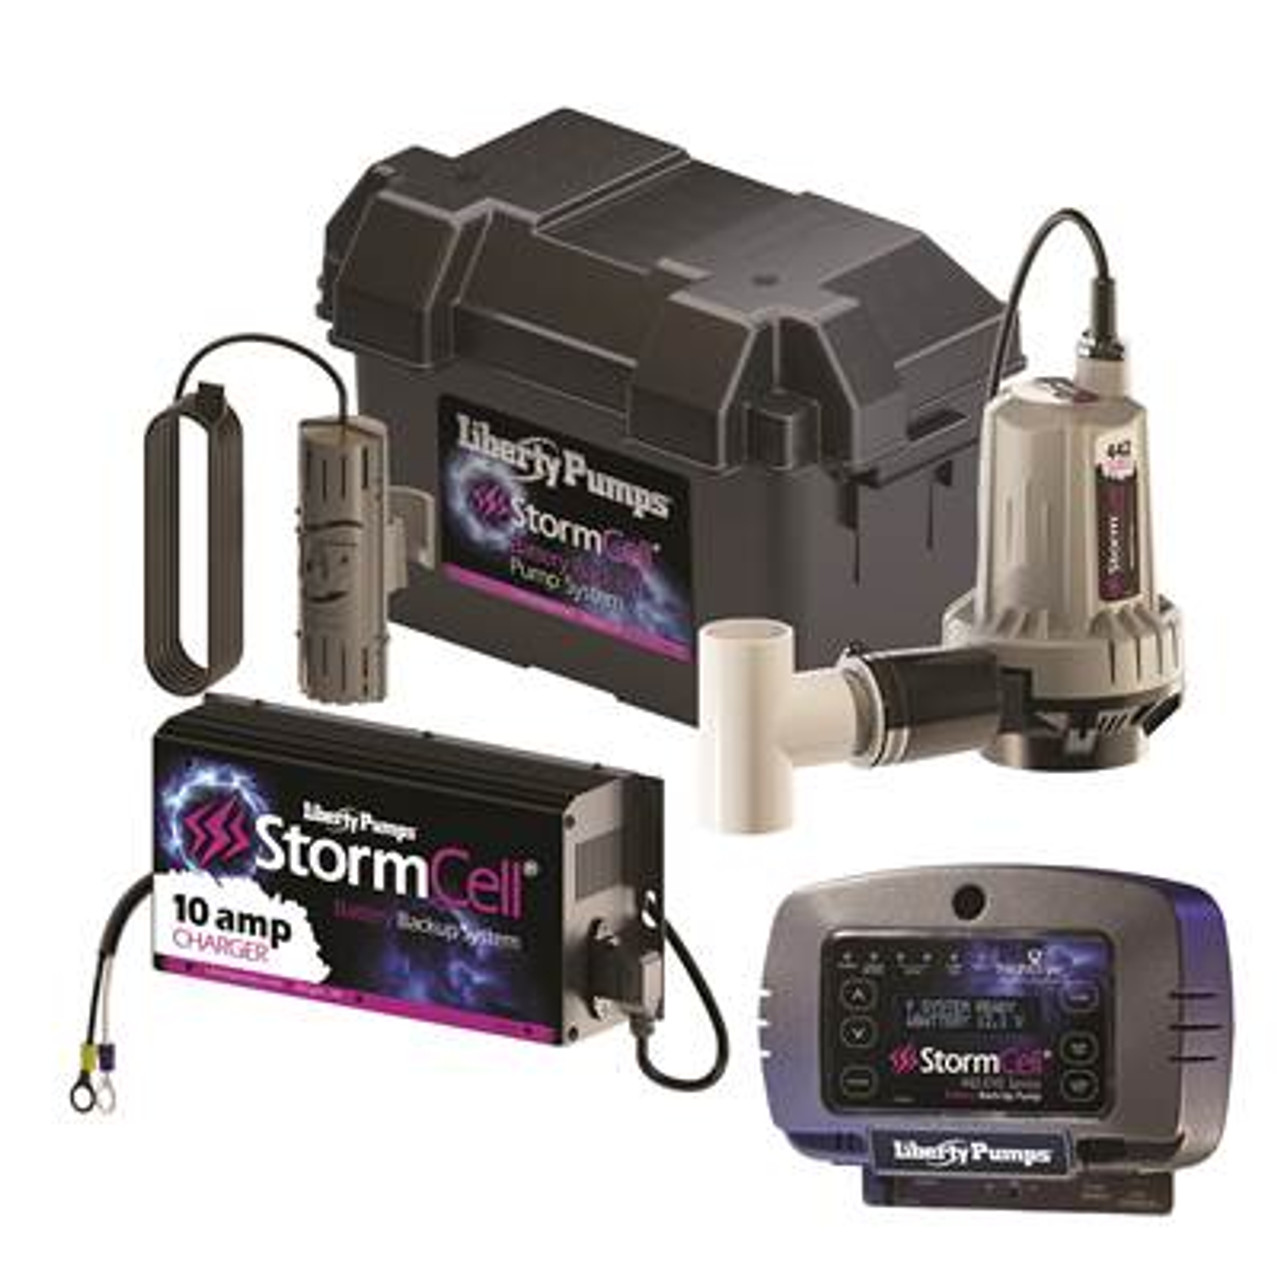 Liberty Pumps 442-10A-EYE, 12V Battery Back-Up Sump Pump System 10 amp, NightEye Wireless Enabled: Backup and Alarm 